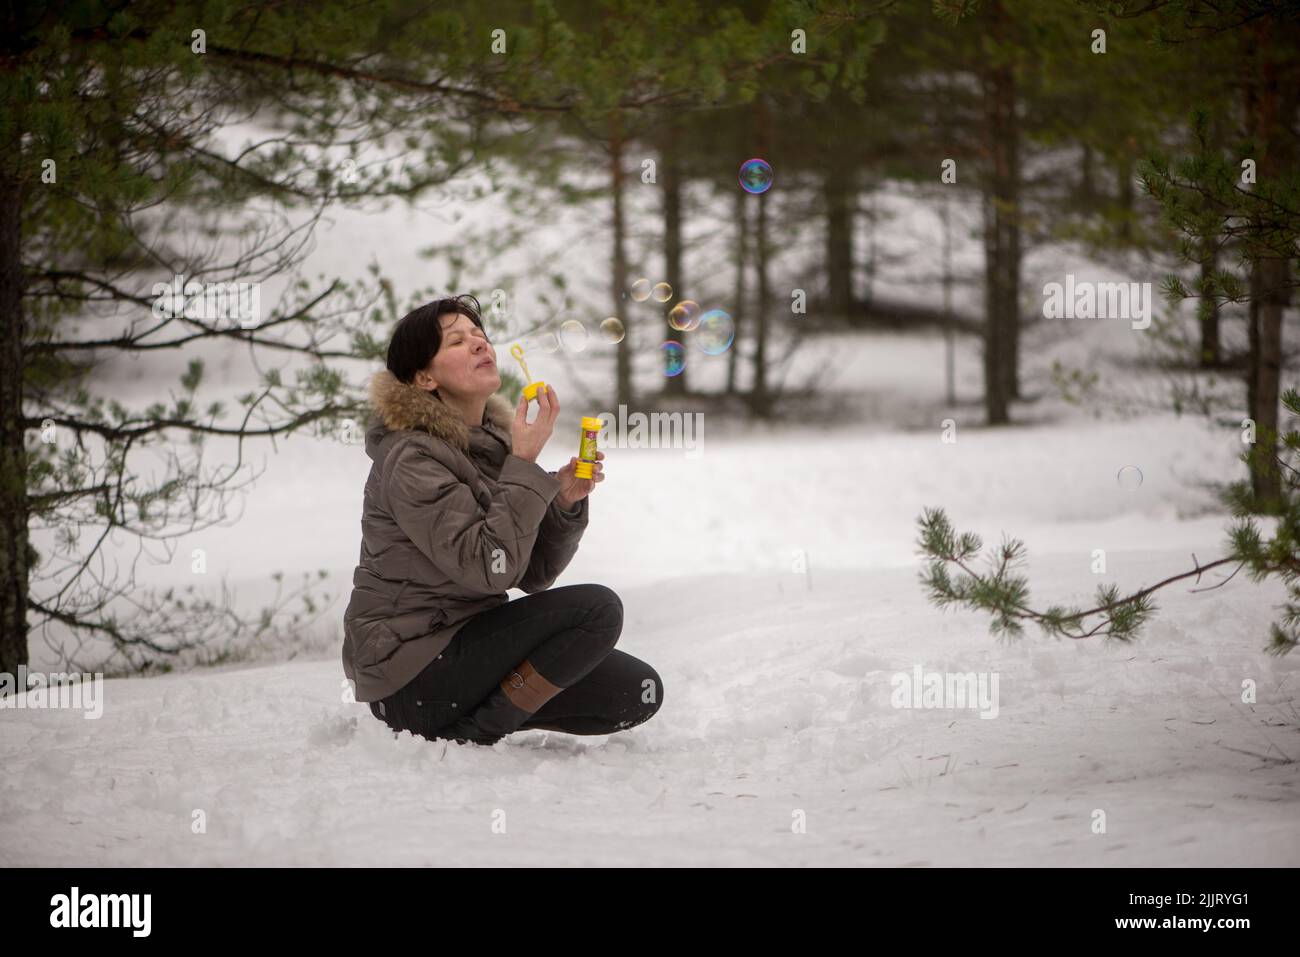 A Shallow focus of a Caucasian woman sitting and blowing bubbles in the snowy forest Stock Photo